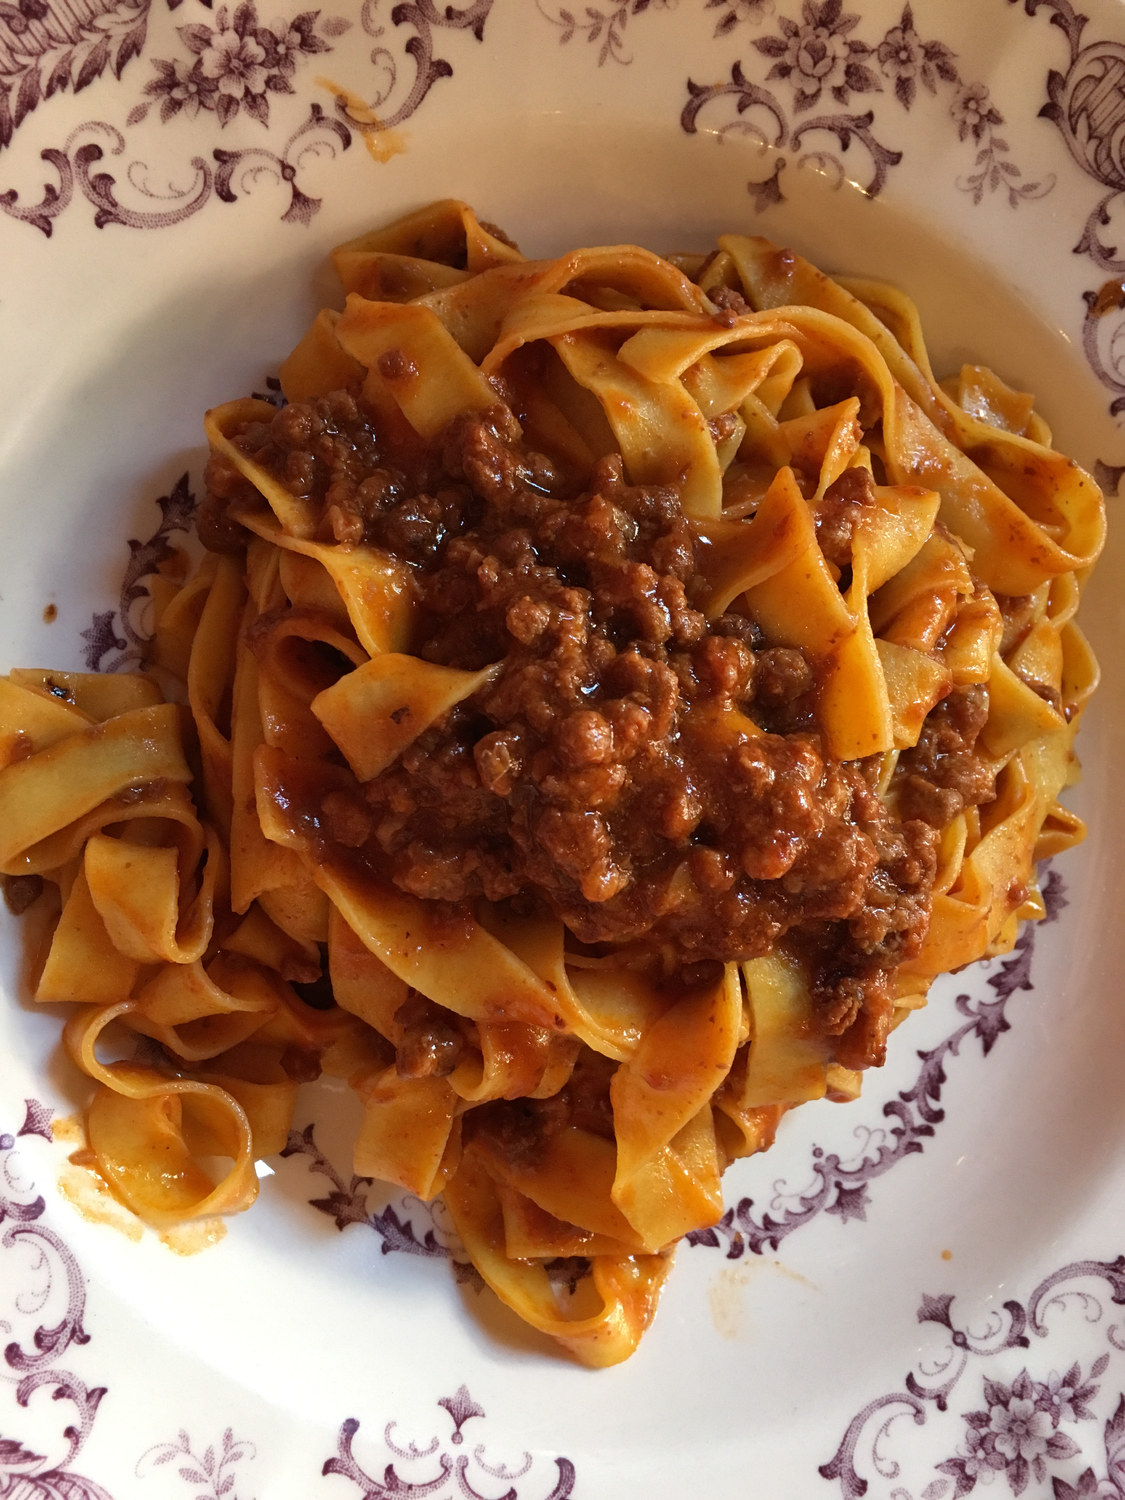 A plate of pasta Bolognese.